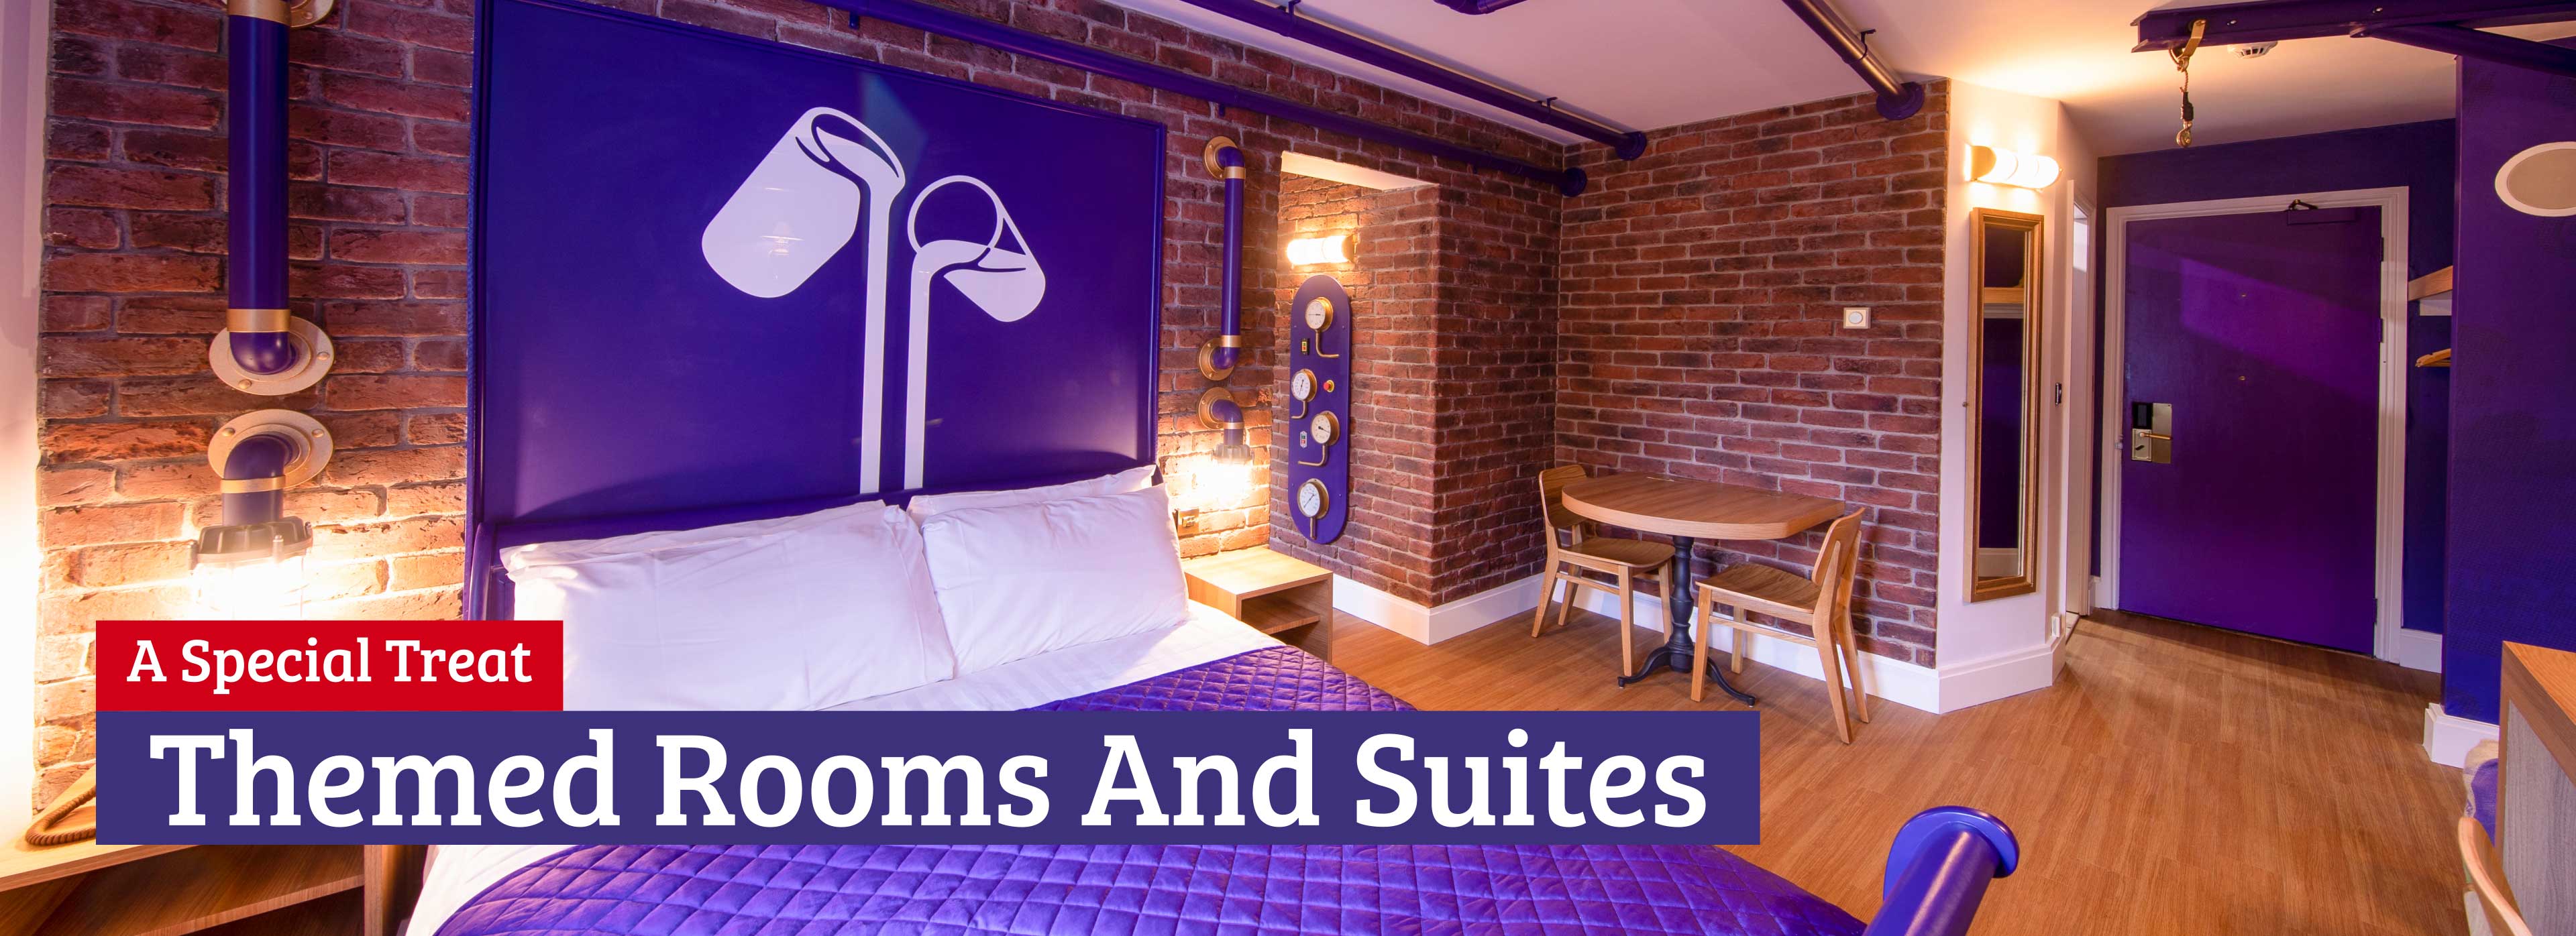 Themed Rooms at Alton Towers Resort Hotels